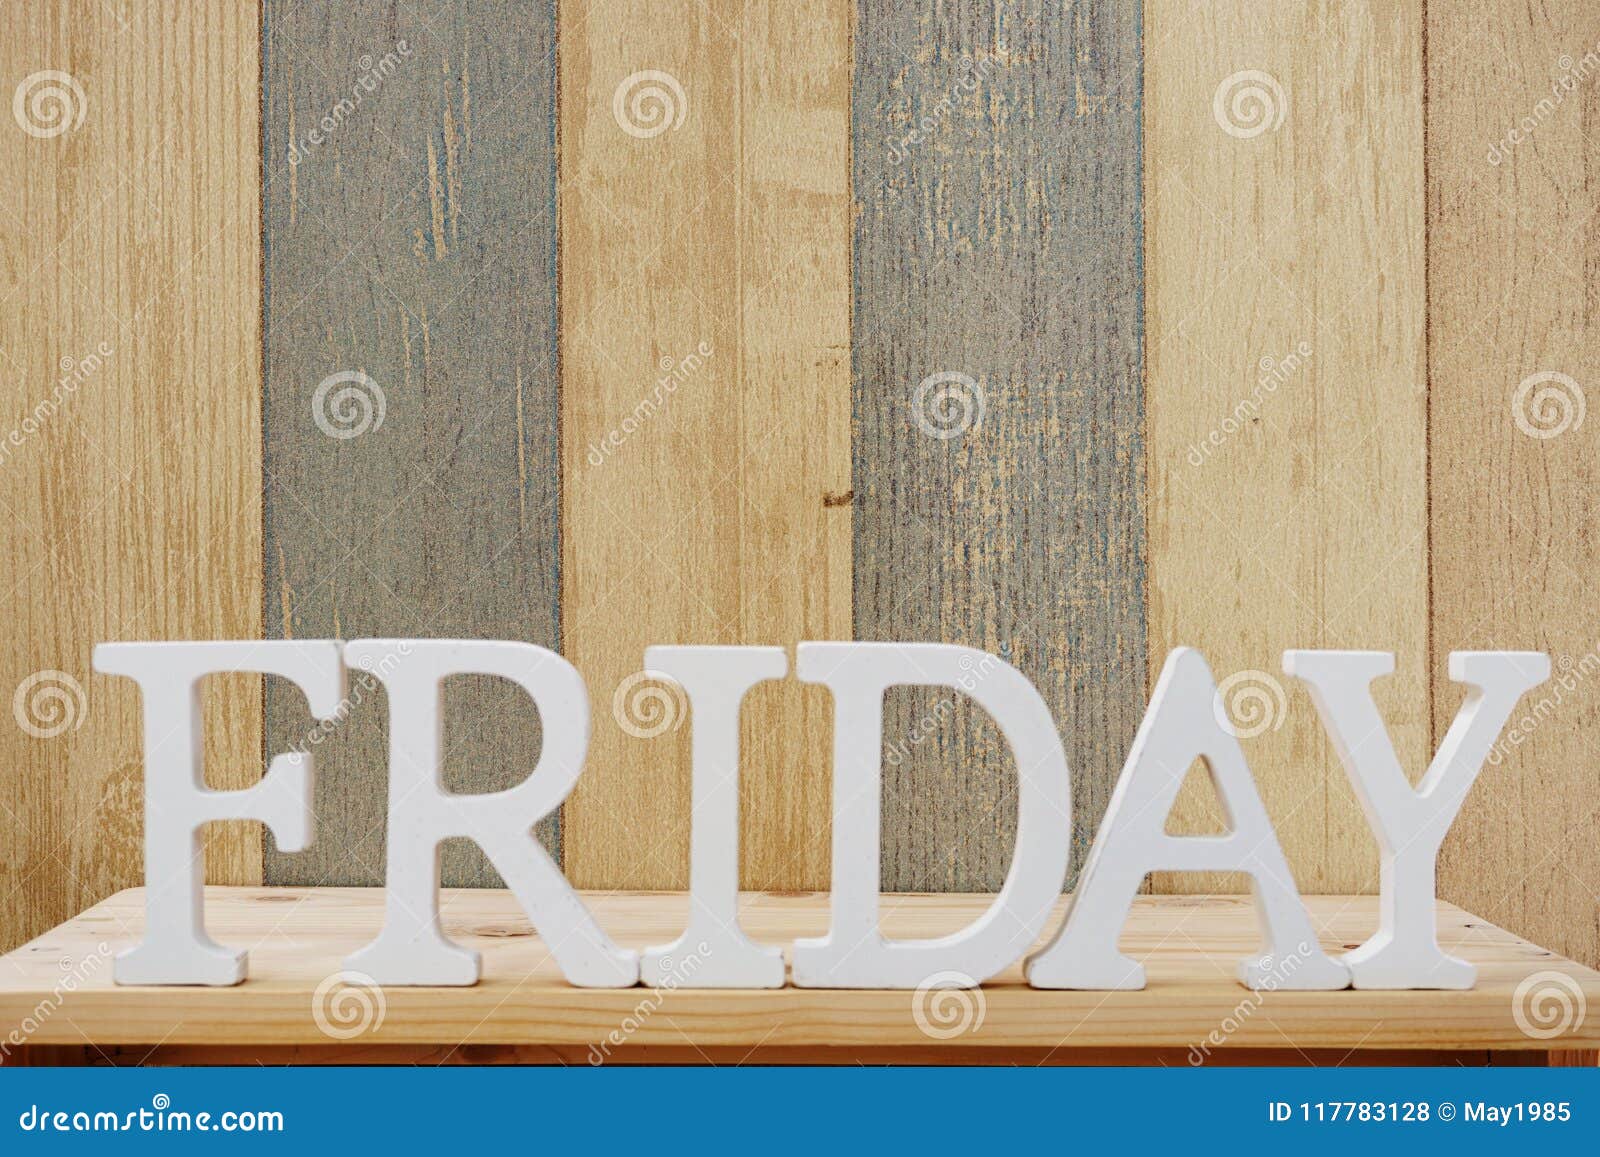 Friday Word Decorative Letters on Wooden Background Stock Photo - Image ...